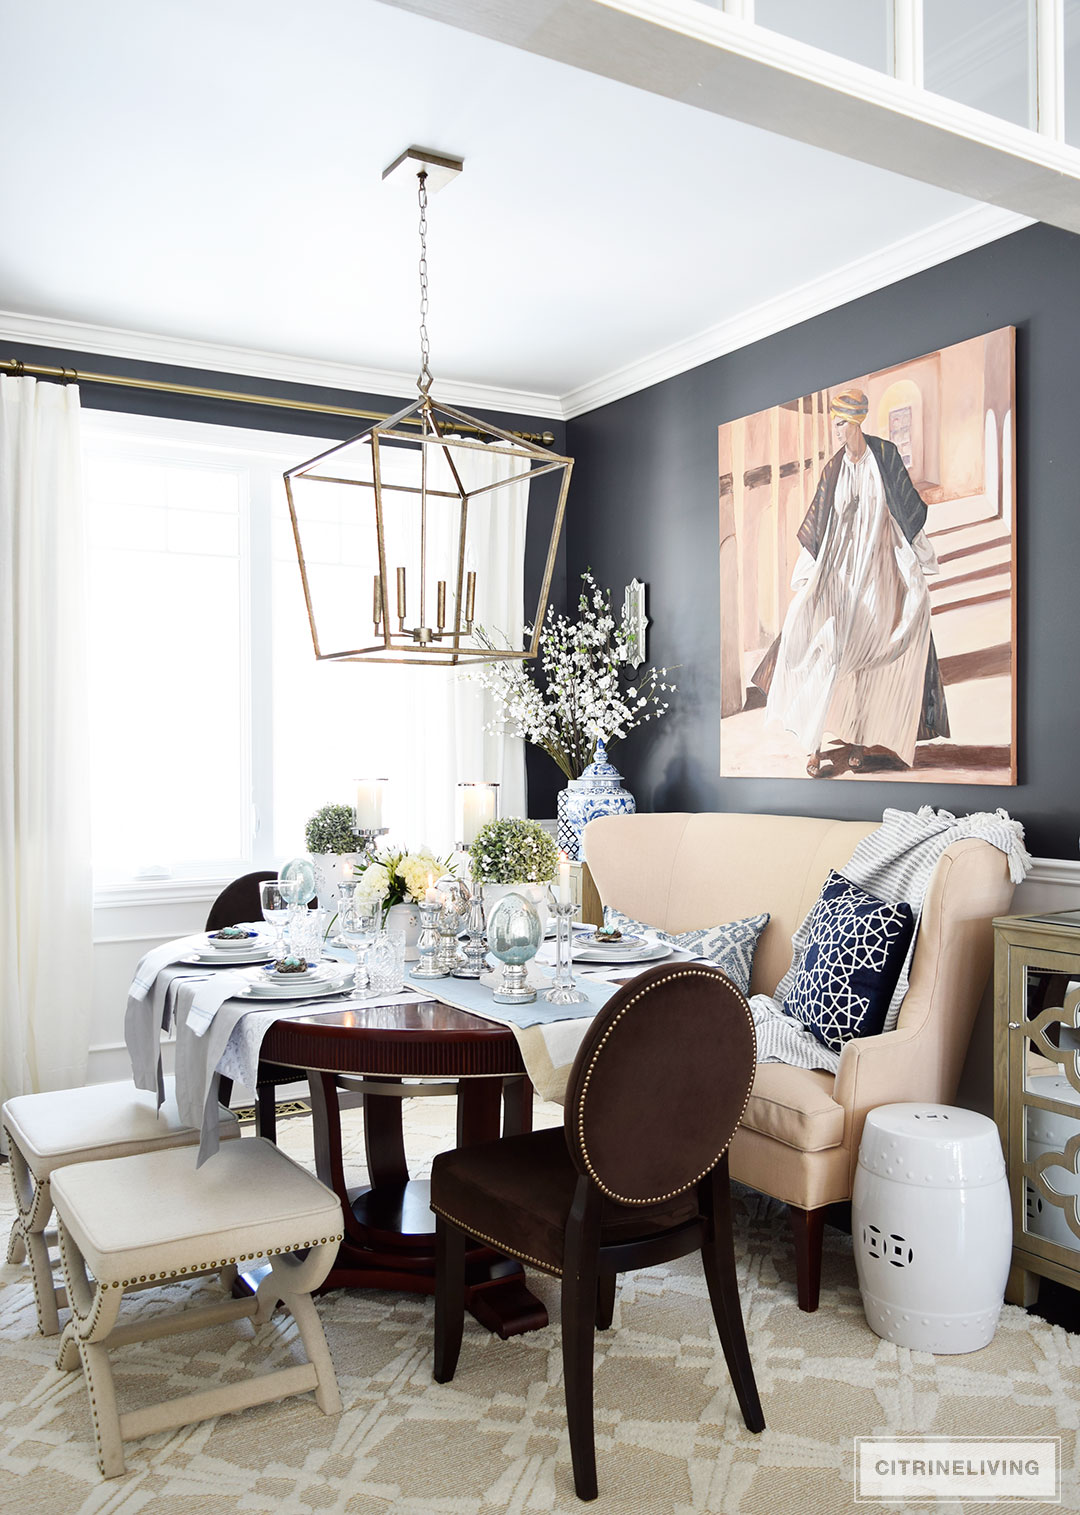 Elegant dining room with black walls and blue and white chinoiserie accents. A simple Easter or Spring tablescape with metallic accents adds sophistication.